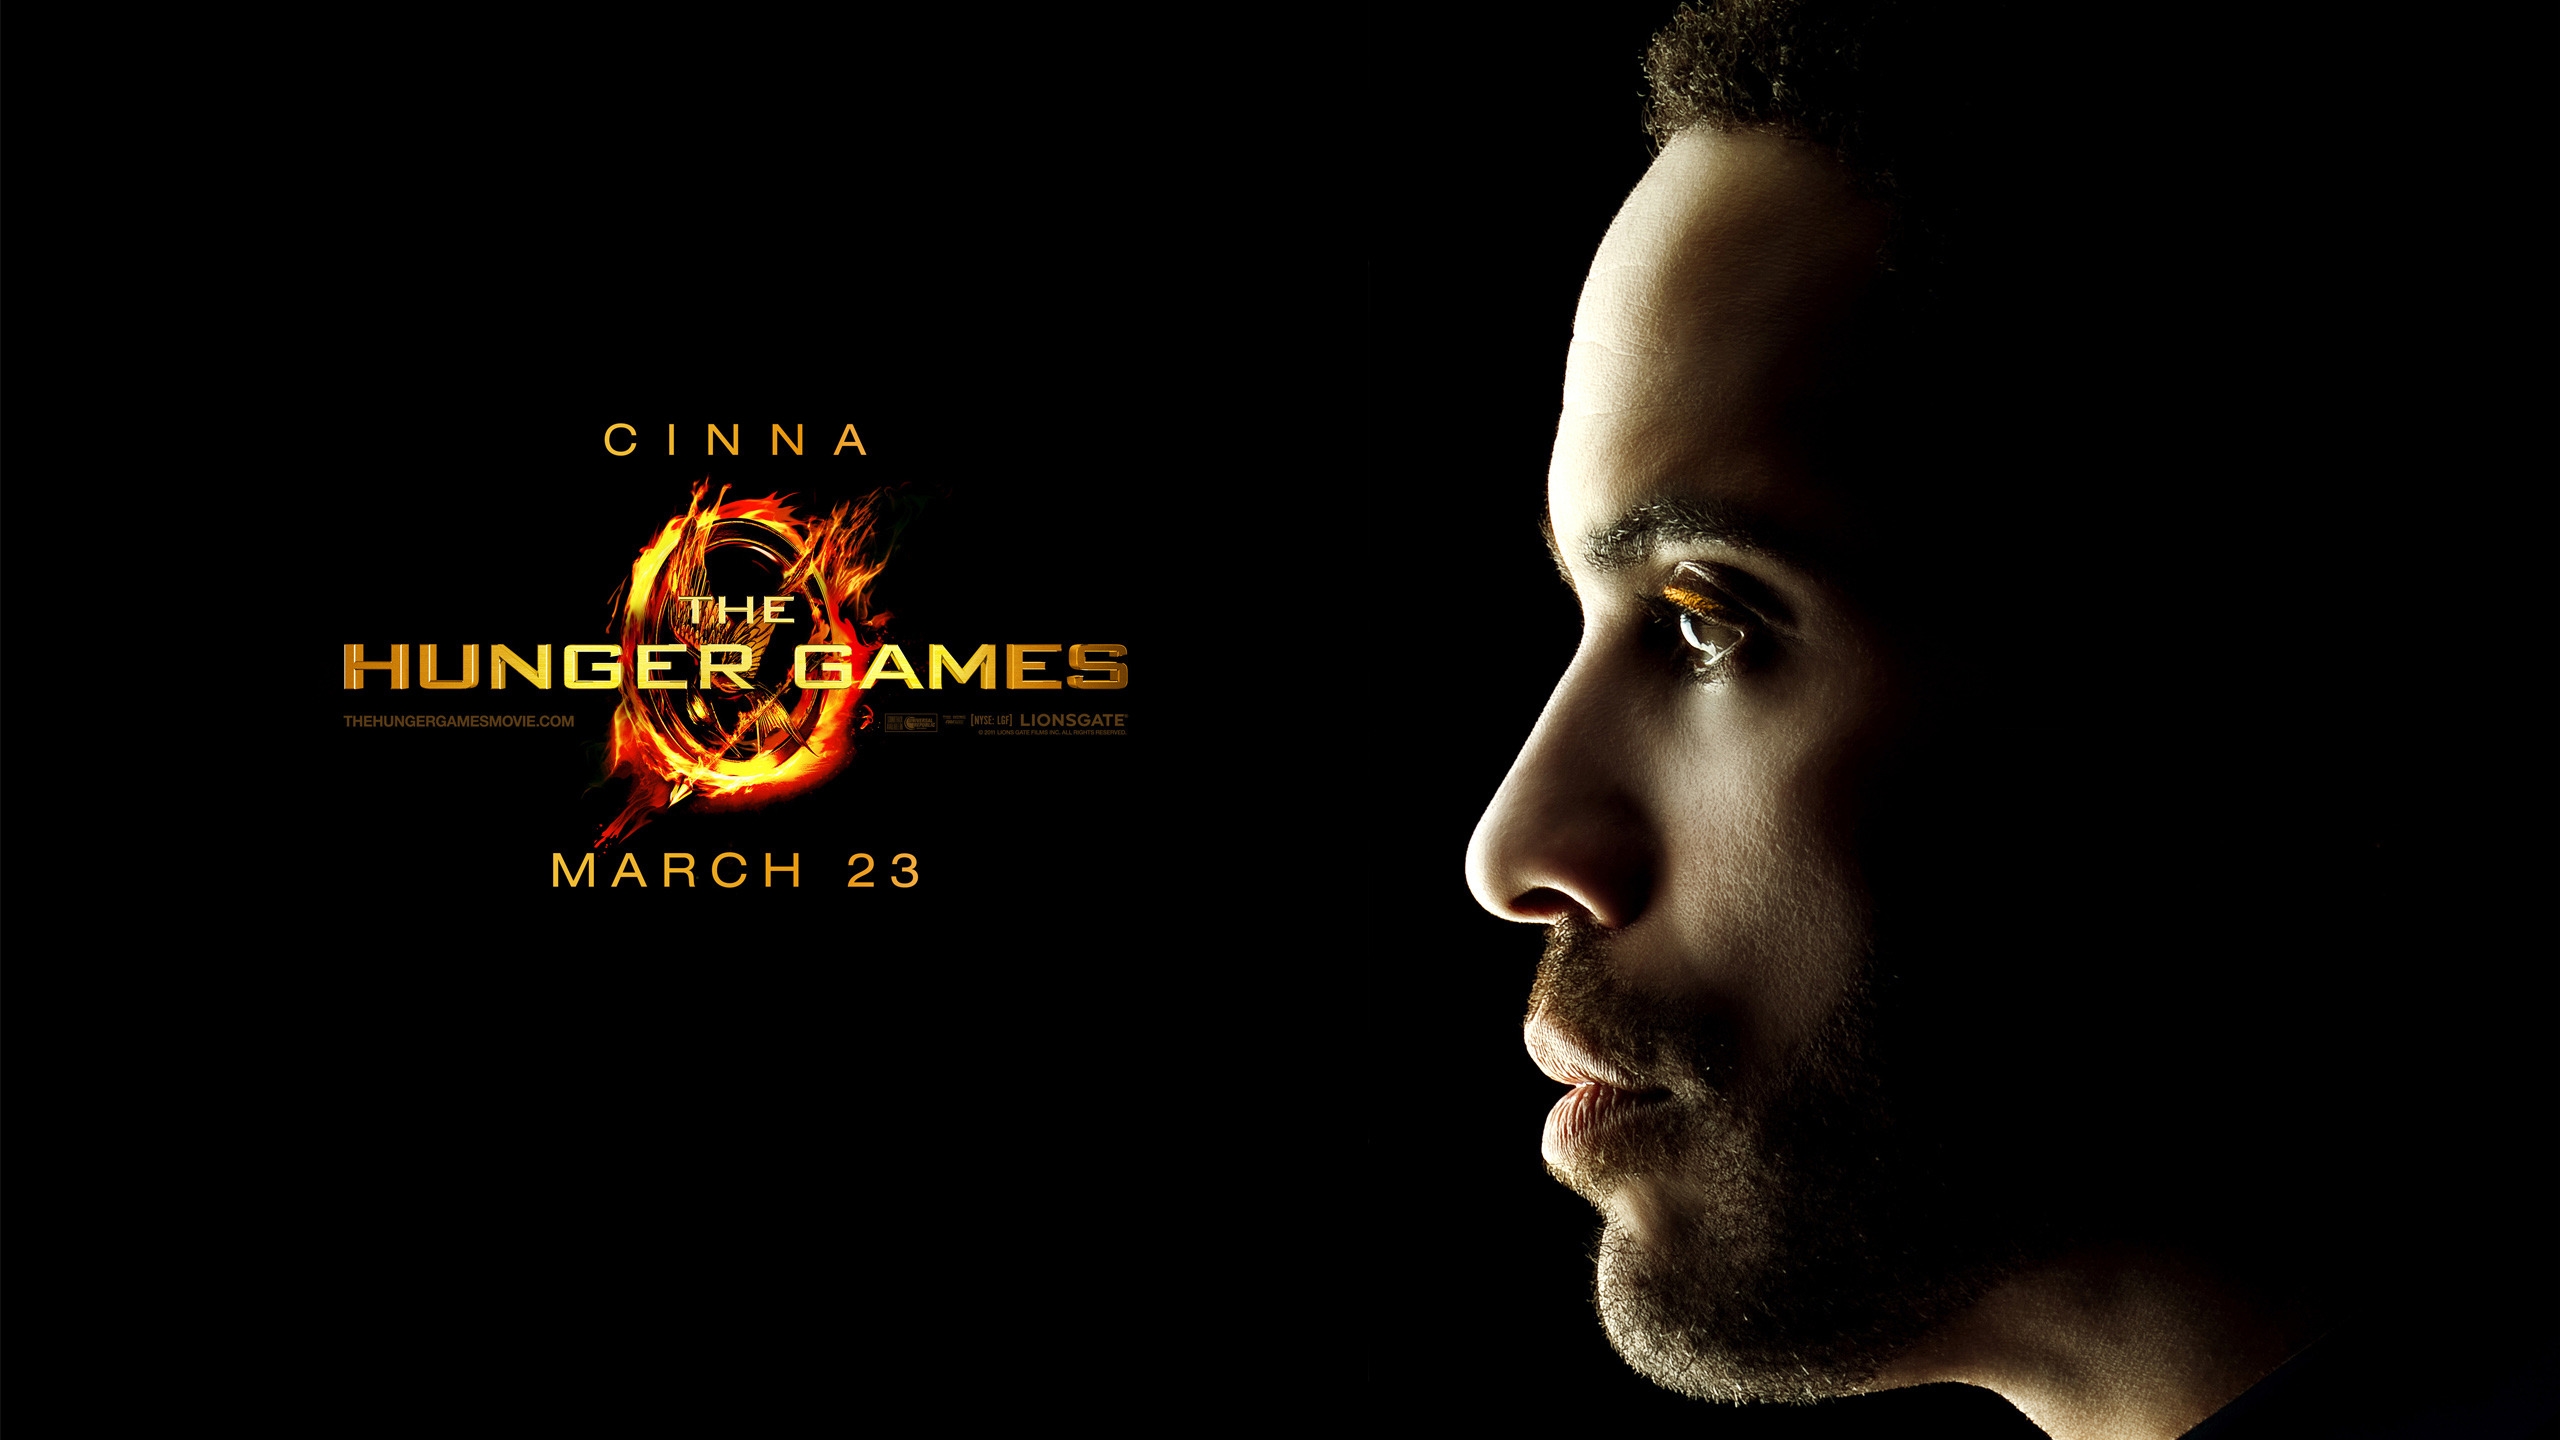 The Hunger Games Cinna for 2560x1440 HDTV resolution